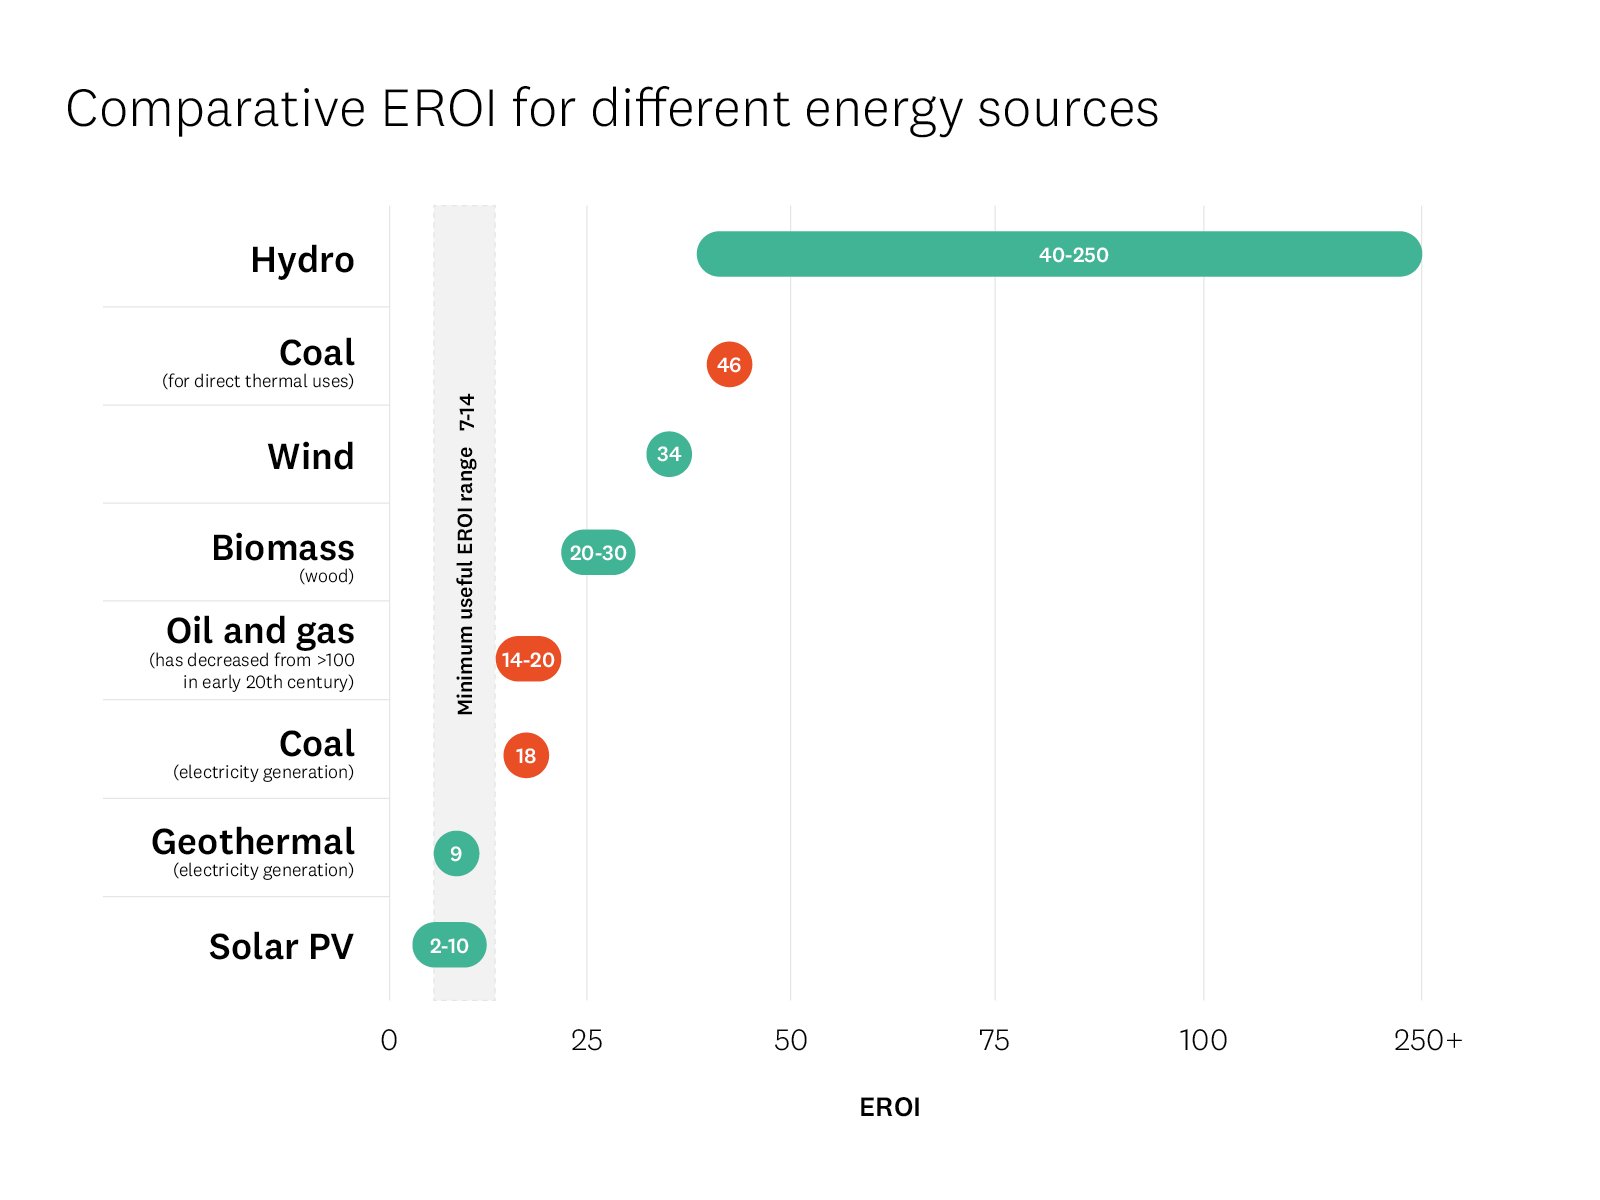 Graphic shows comparative EROI for different energy sources. 